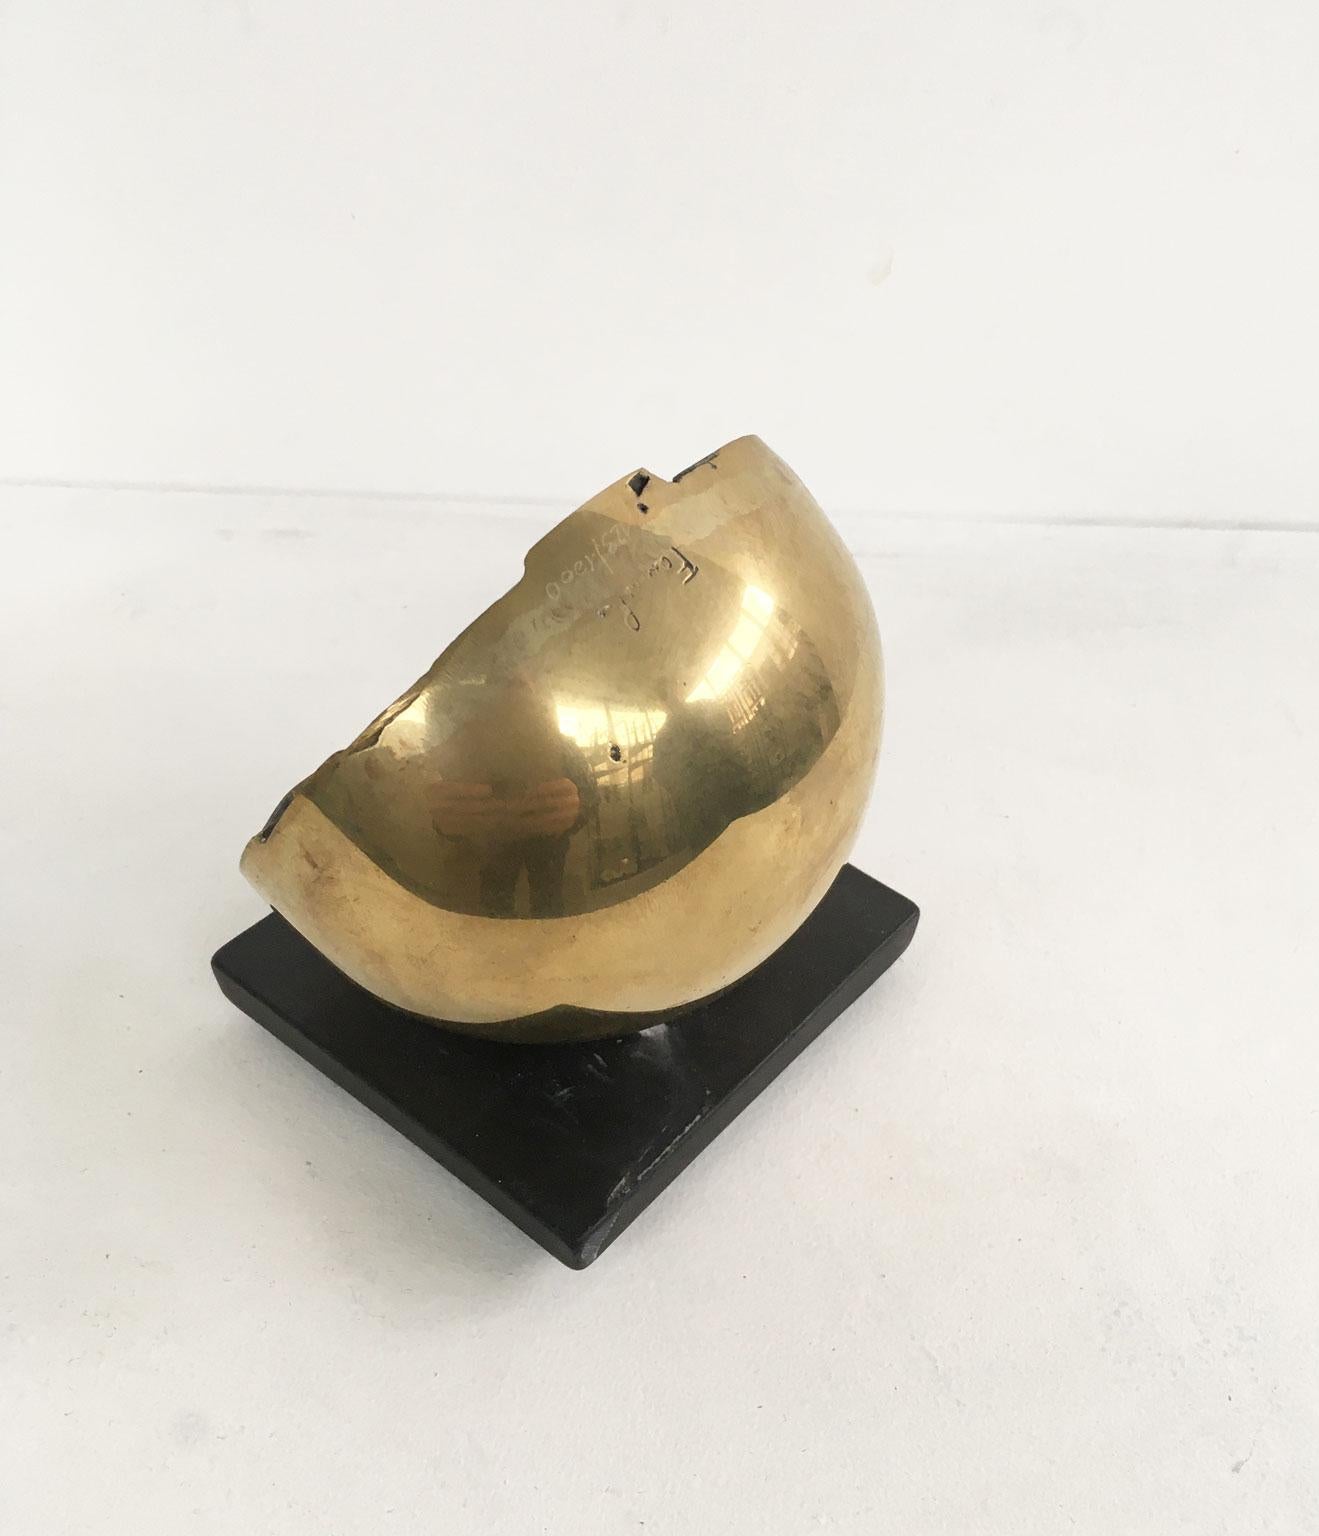 1978 Italy Bronze Abstract Sculpture by Fanna Roncoroni Labirinto Labyrinth For Sale 1